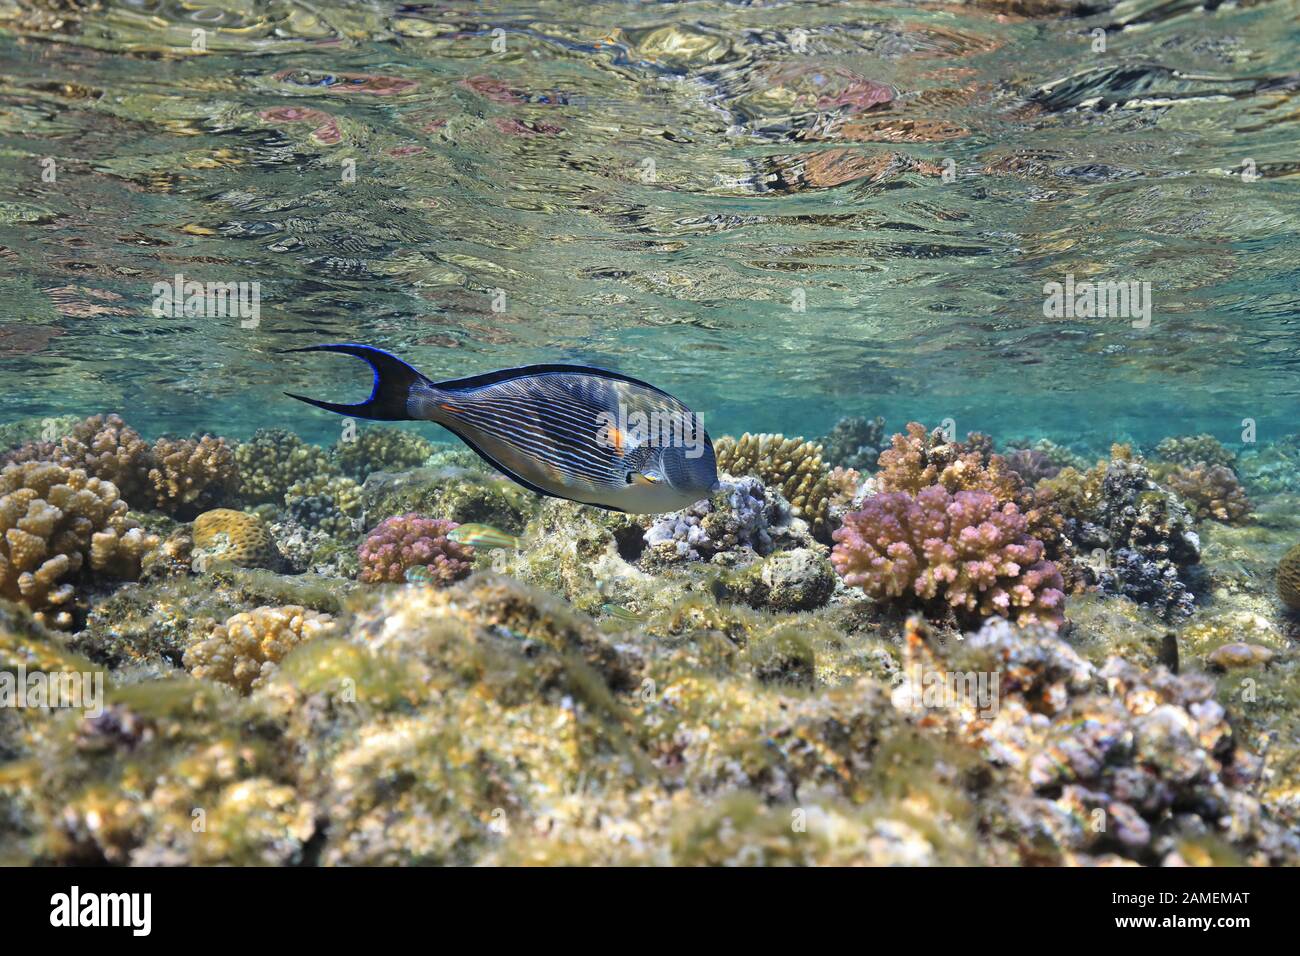 Sohal surgeonfish (Acanthurus sohal) sott'acqua in tropical Coral reef del Mar Rosso Foto Stock